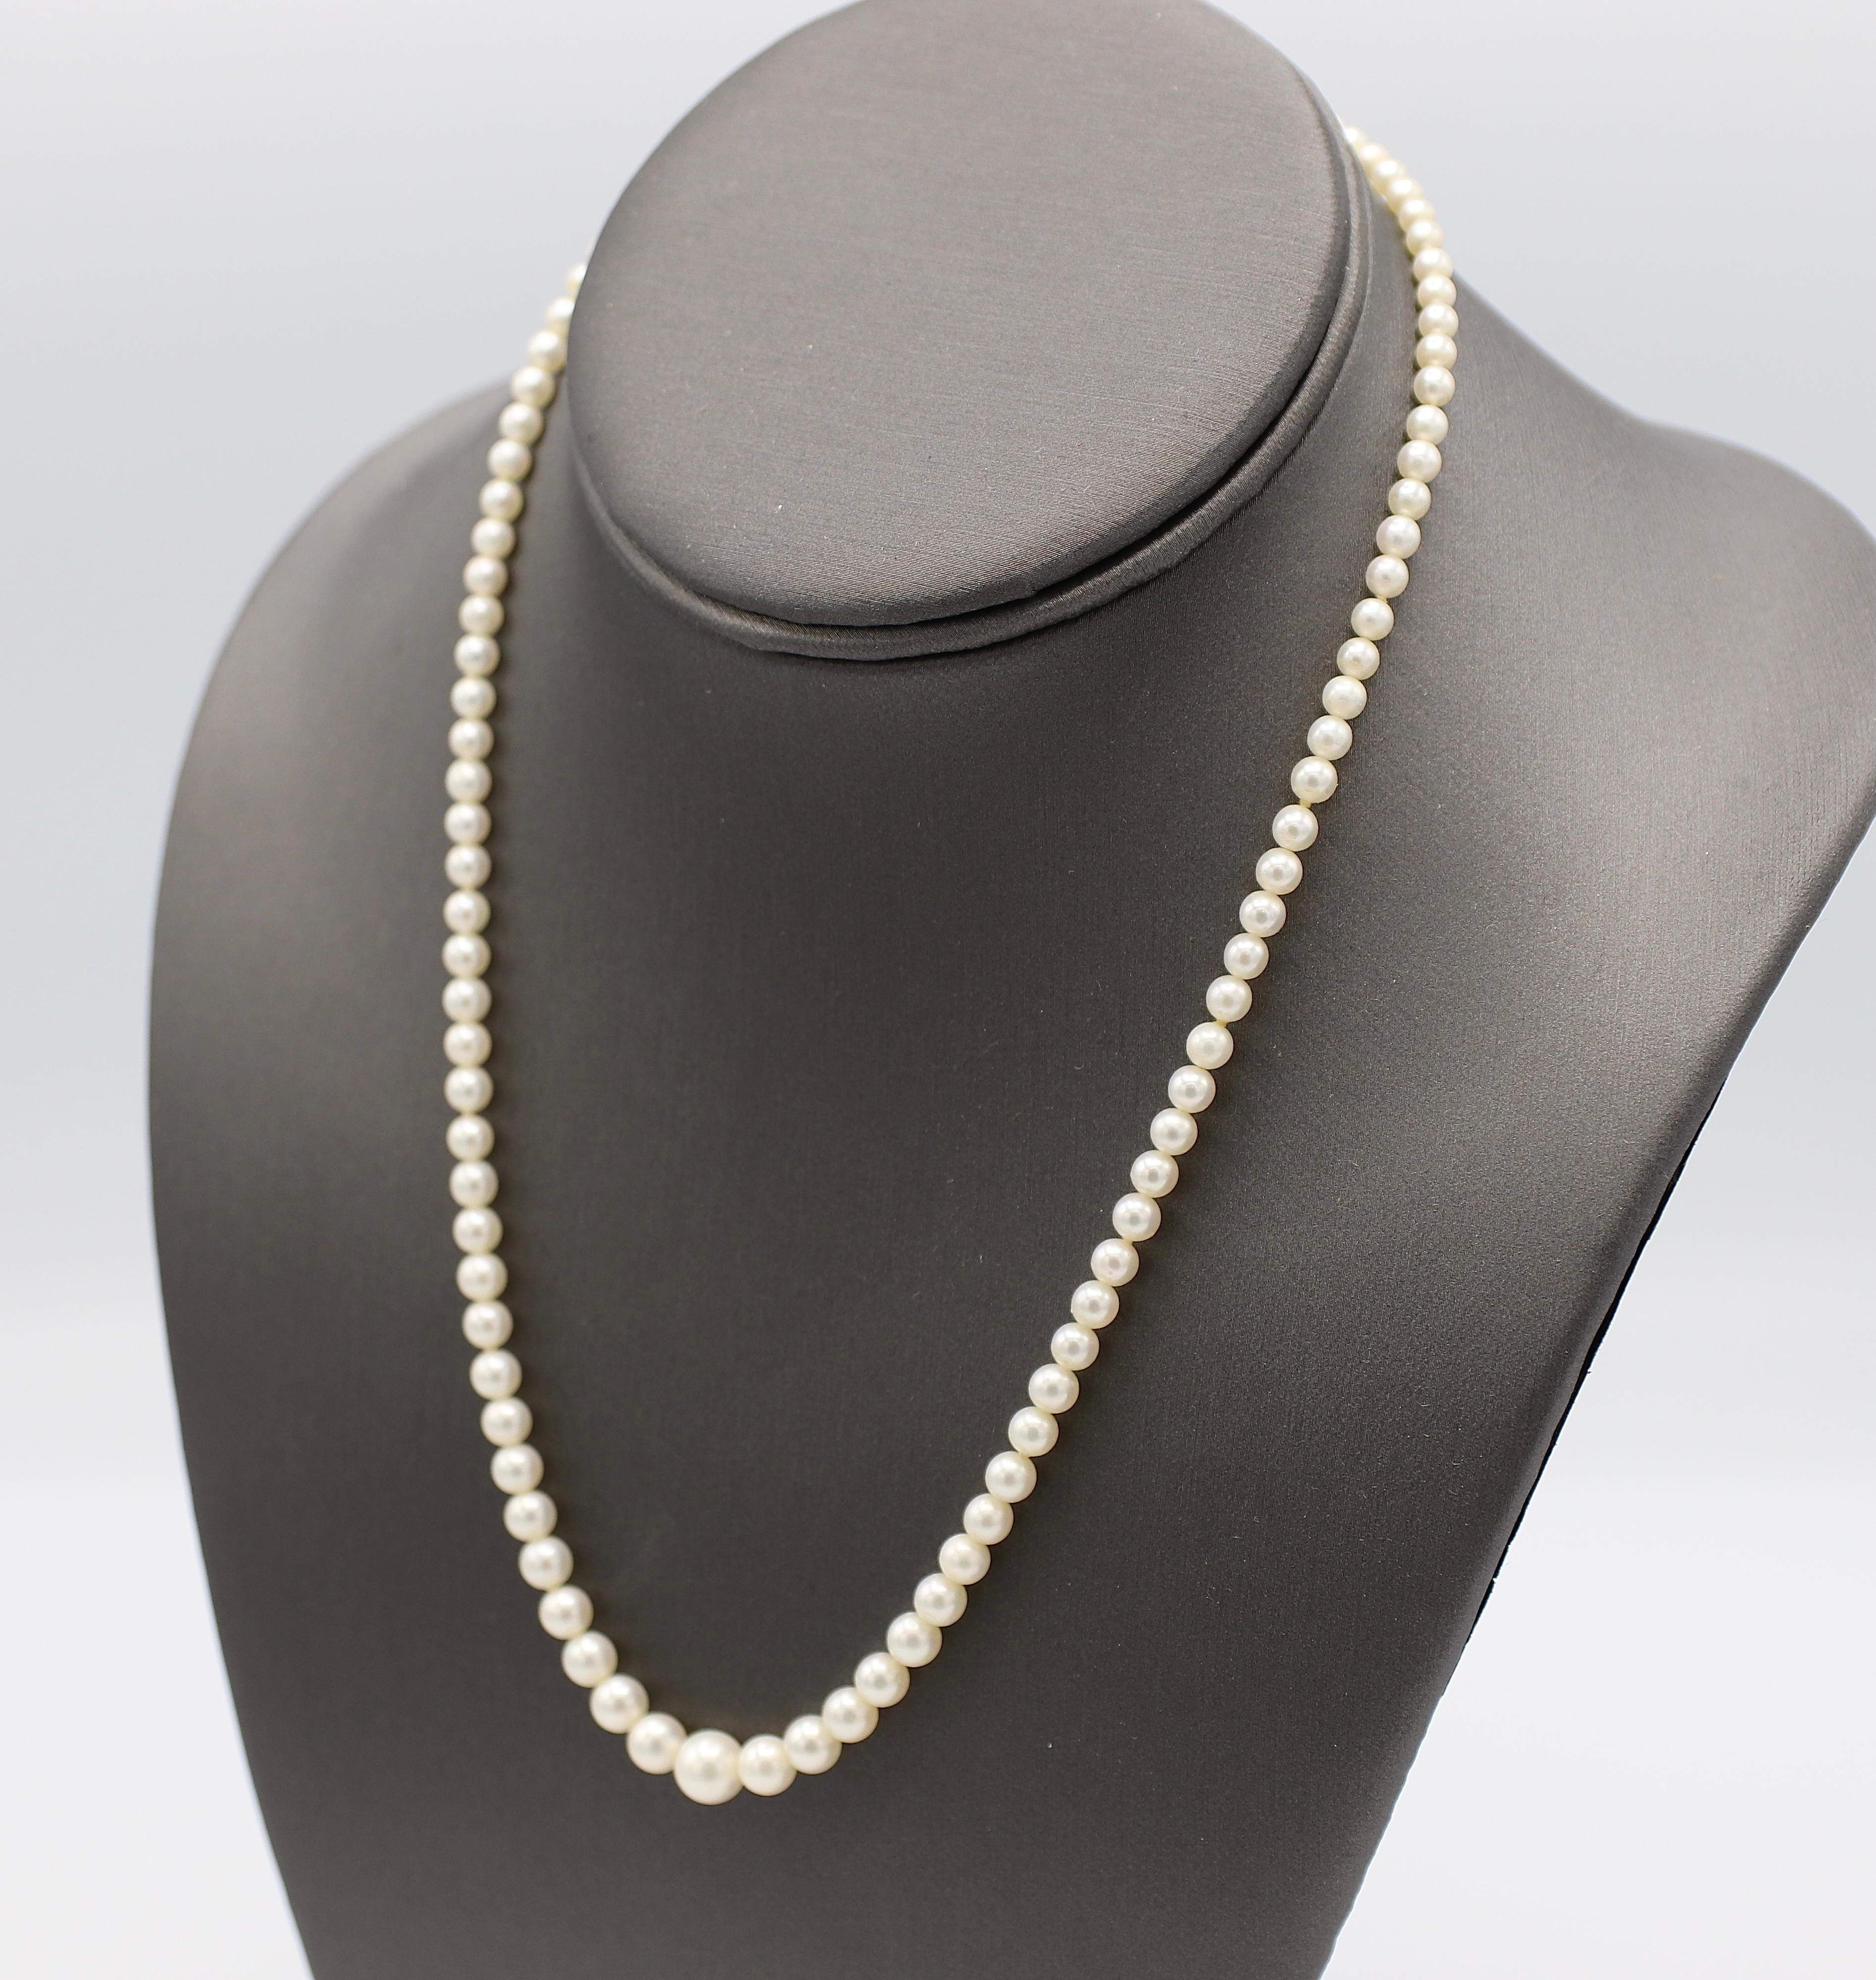 Vintage Mikimoto Cultured Pearl Graduated Necklace Sterling Silver Clasp with original Box & Papers 

Metal: Sterling Silver 
Weight: 13.64 grams
Pearls: 3.5mm - 7.2mm white in color with creamy luster 
Length: 18 inches 
Box & Papers 
Papers dated